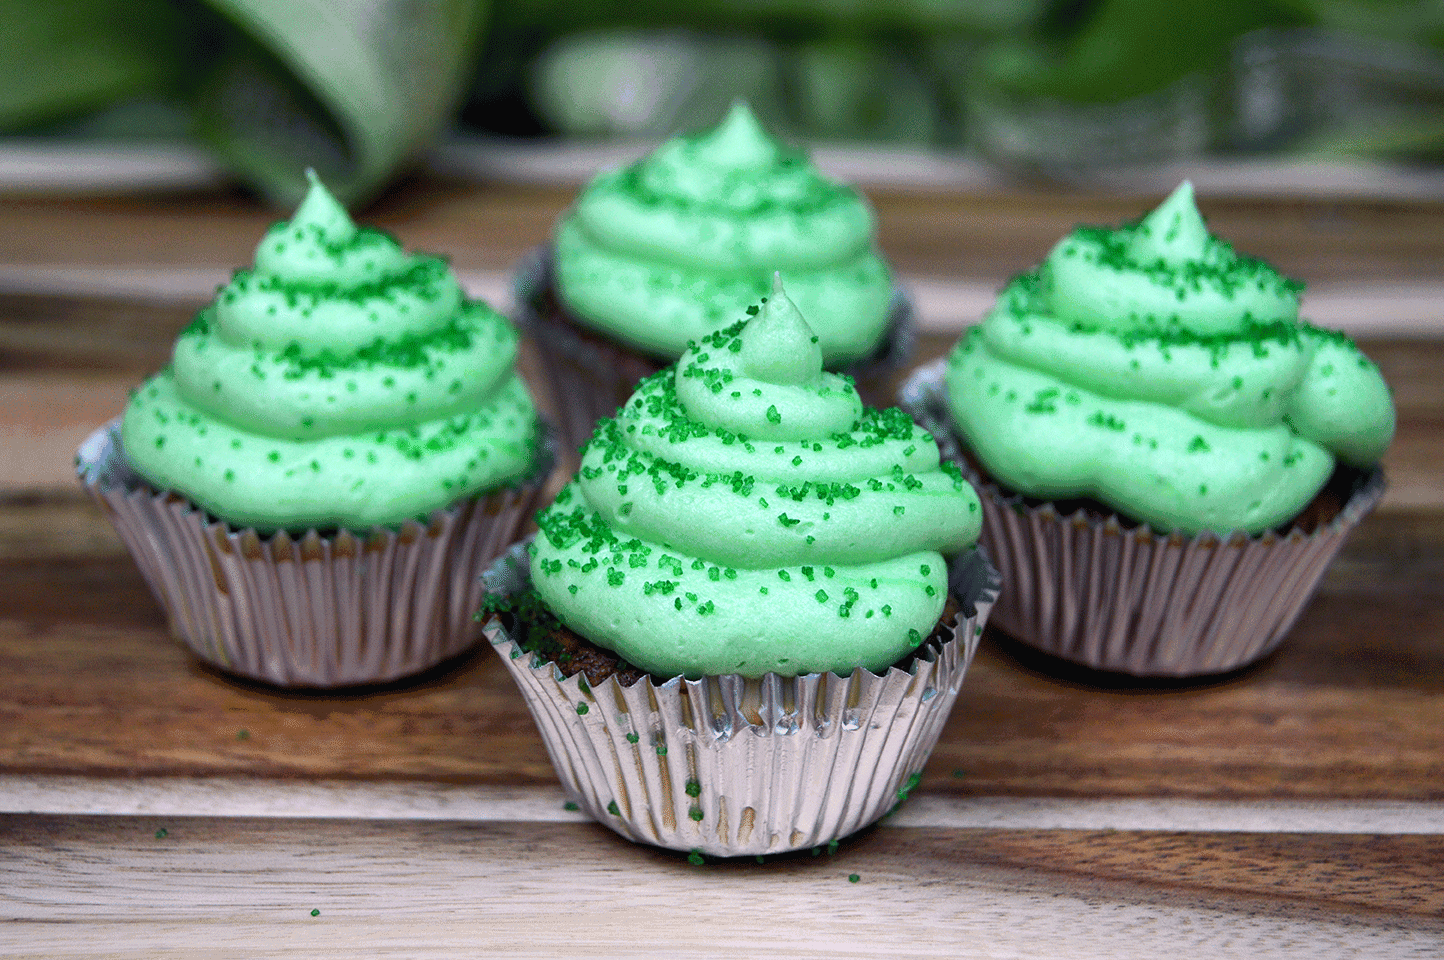 final green iced cupcakes